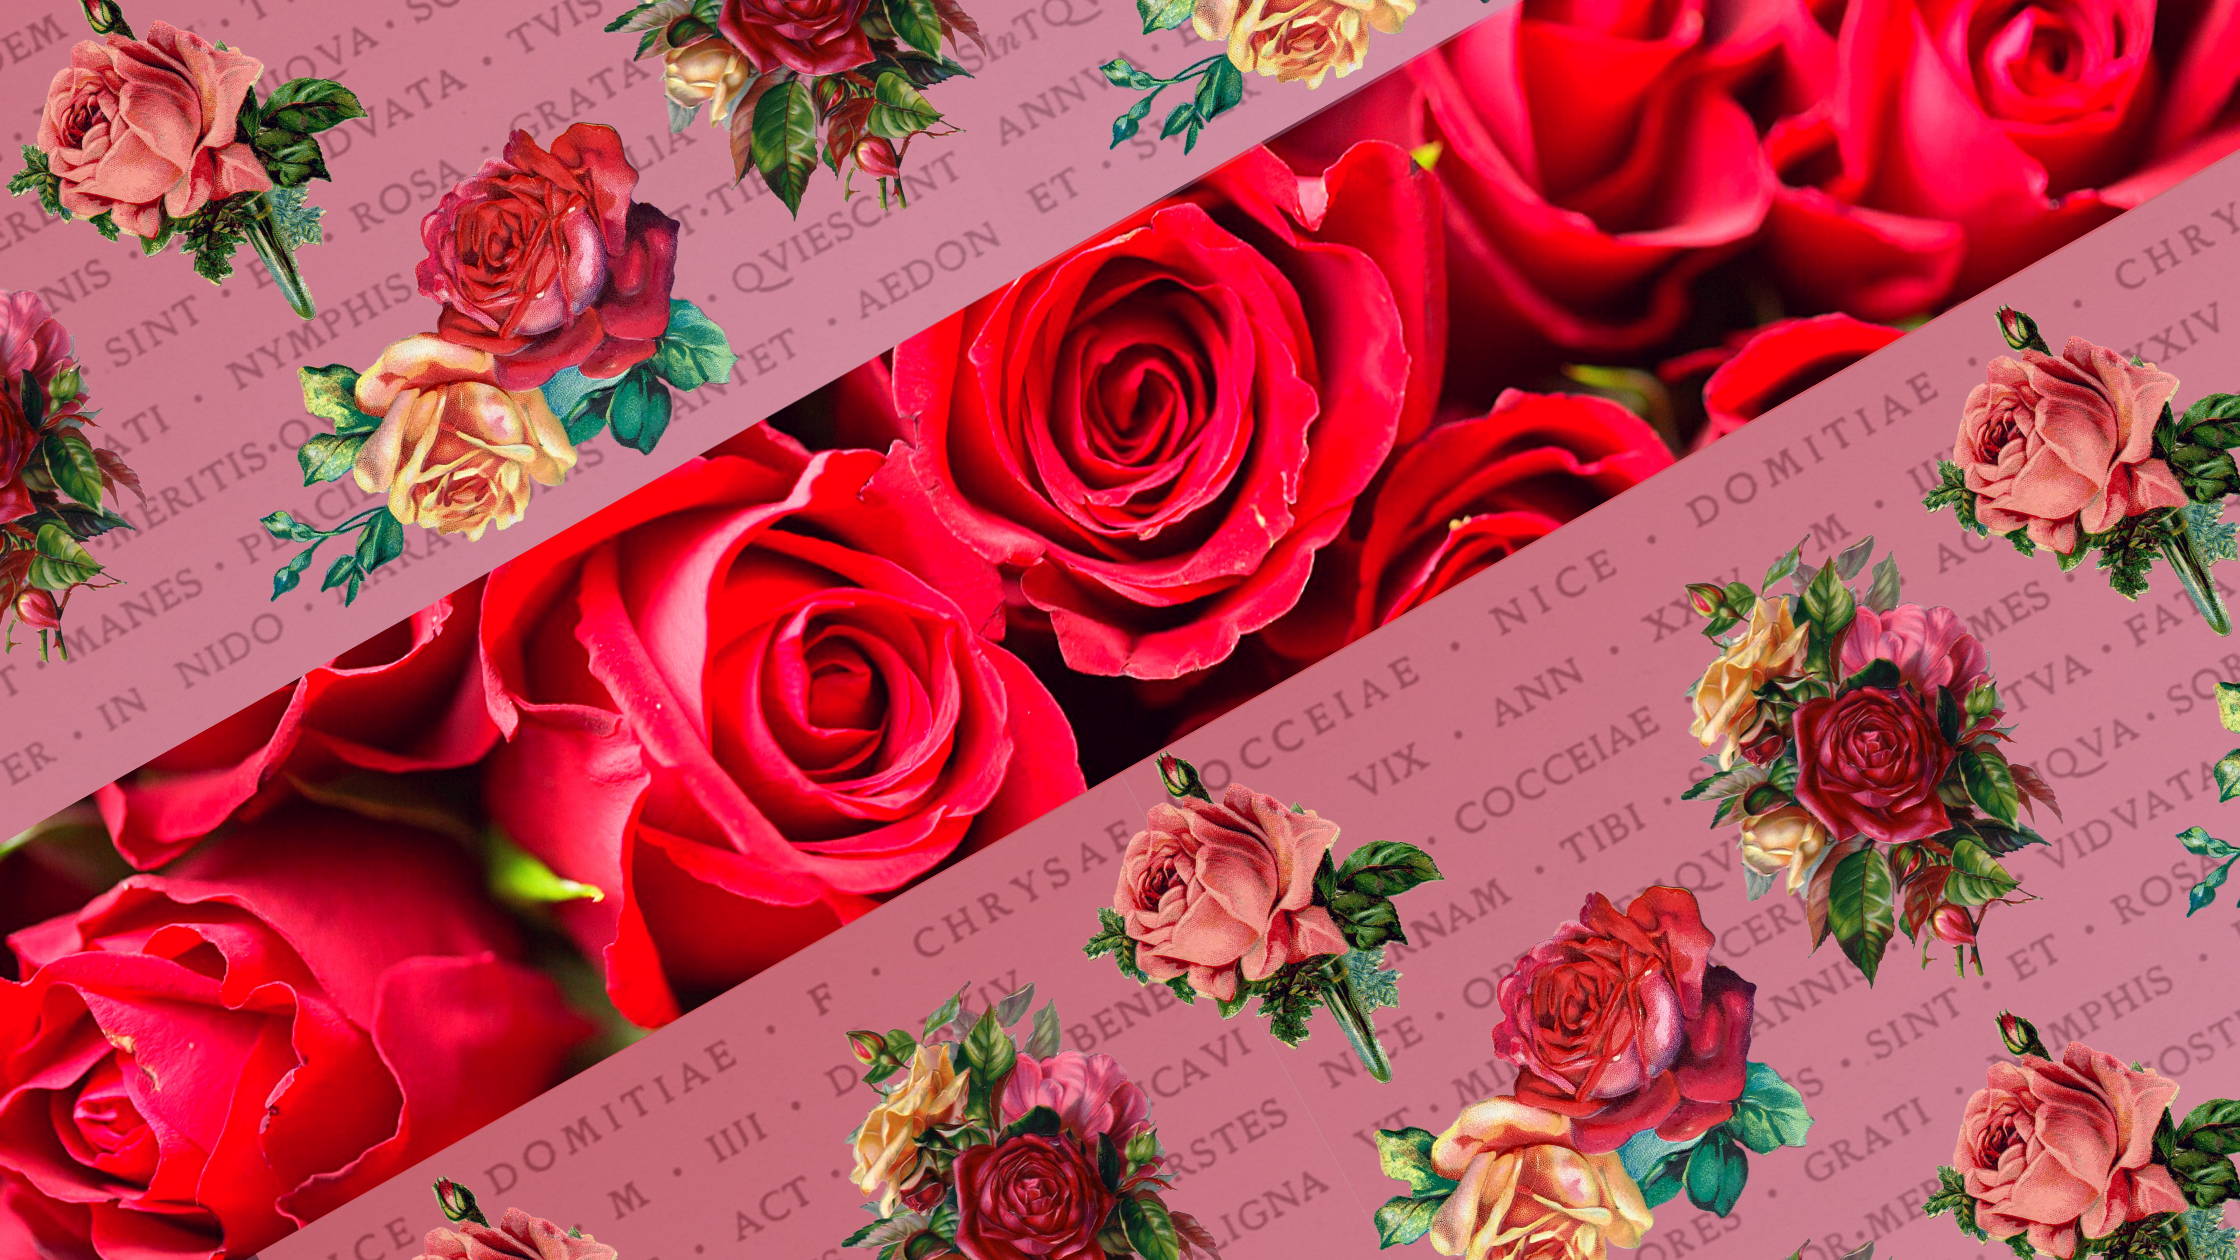 Are poems are mean red violets blue roses 75+ “Roses